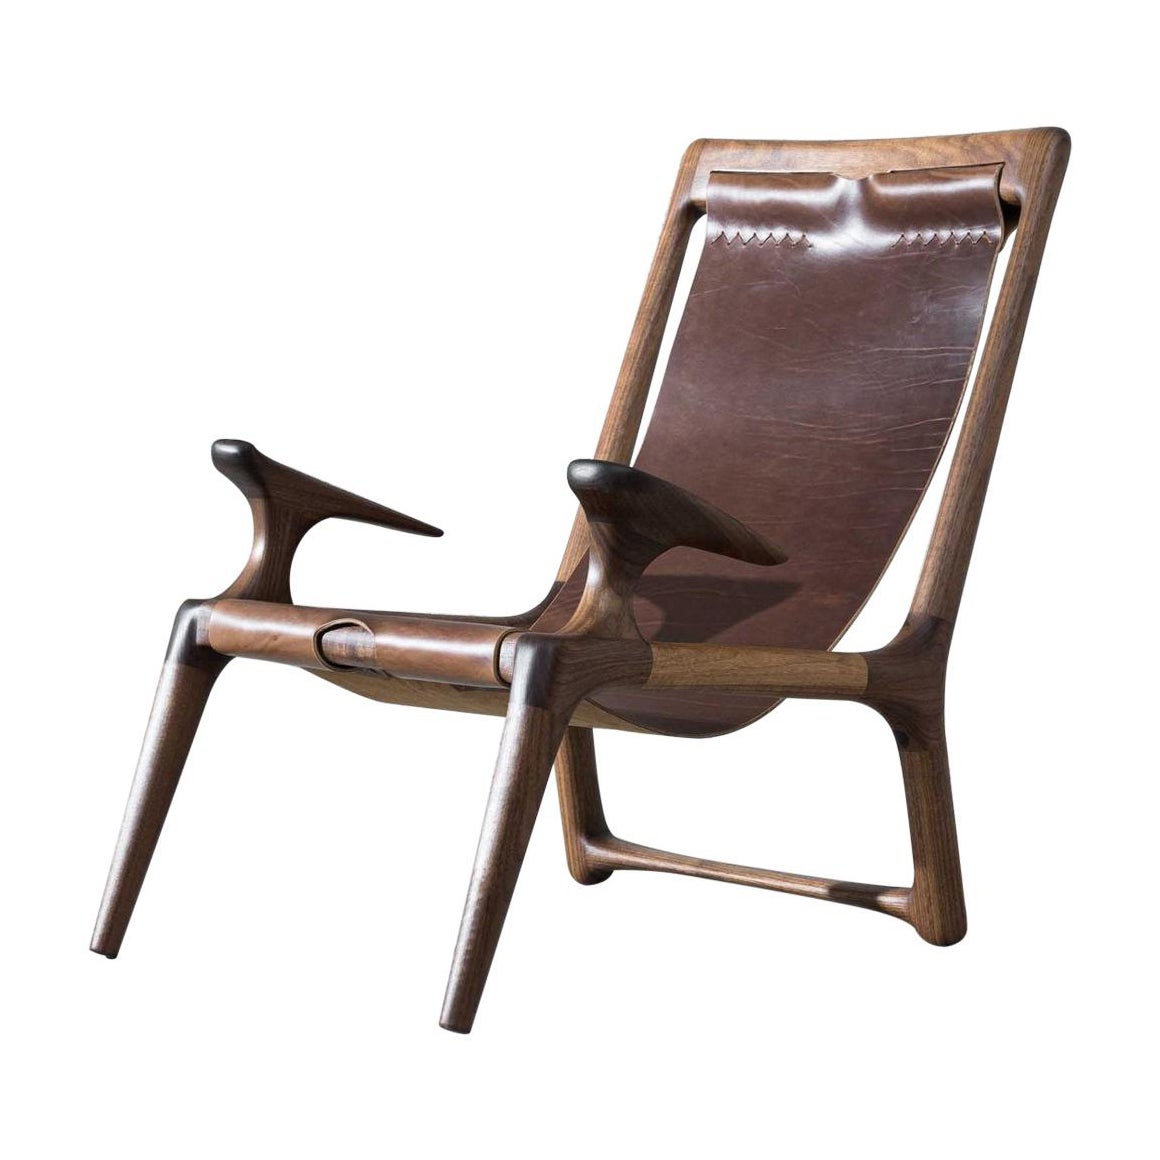 Walnut & Leather Sling Chair by Fernweh Woodworking For Sale